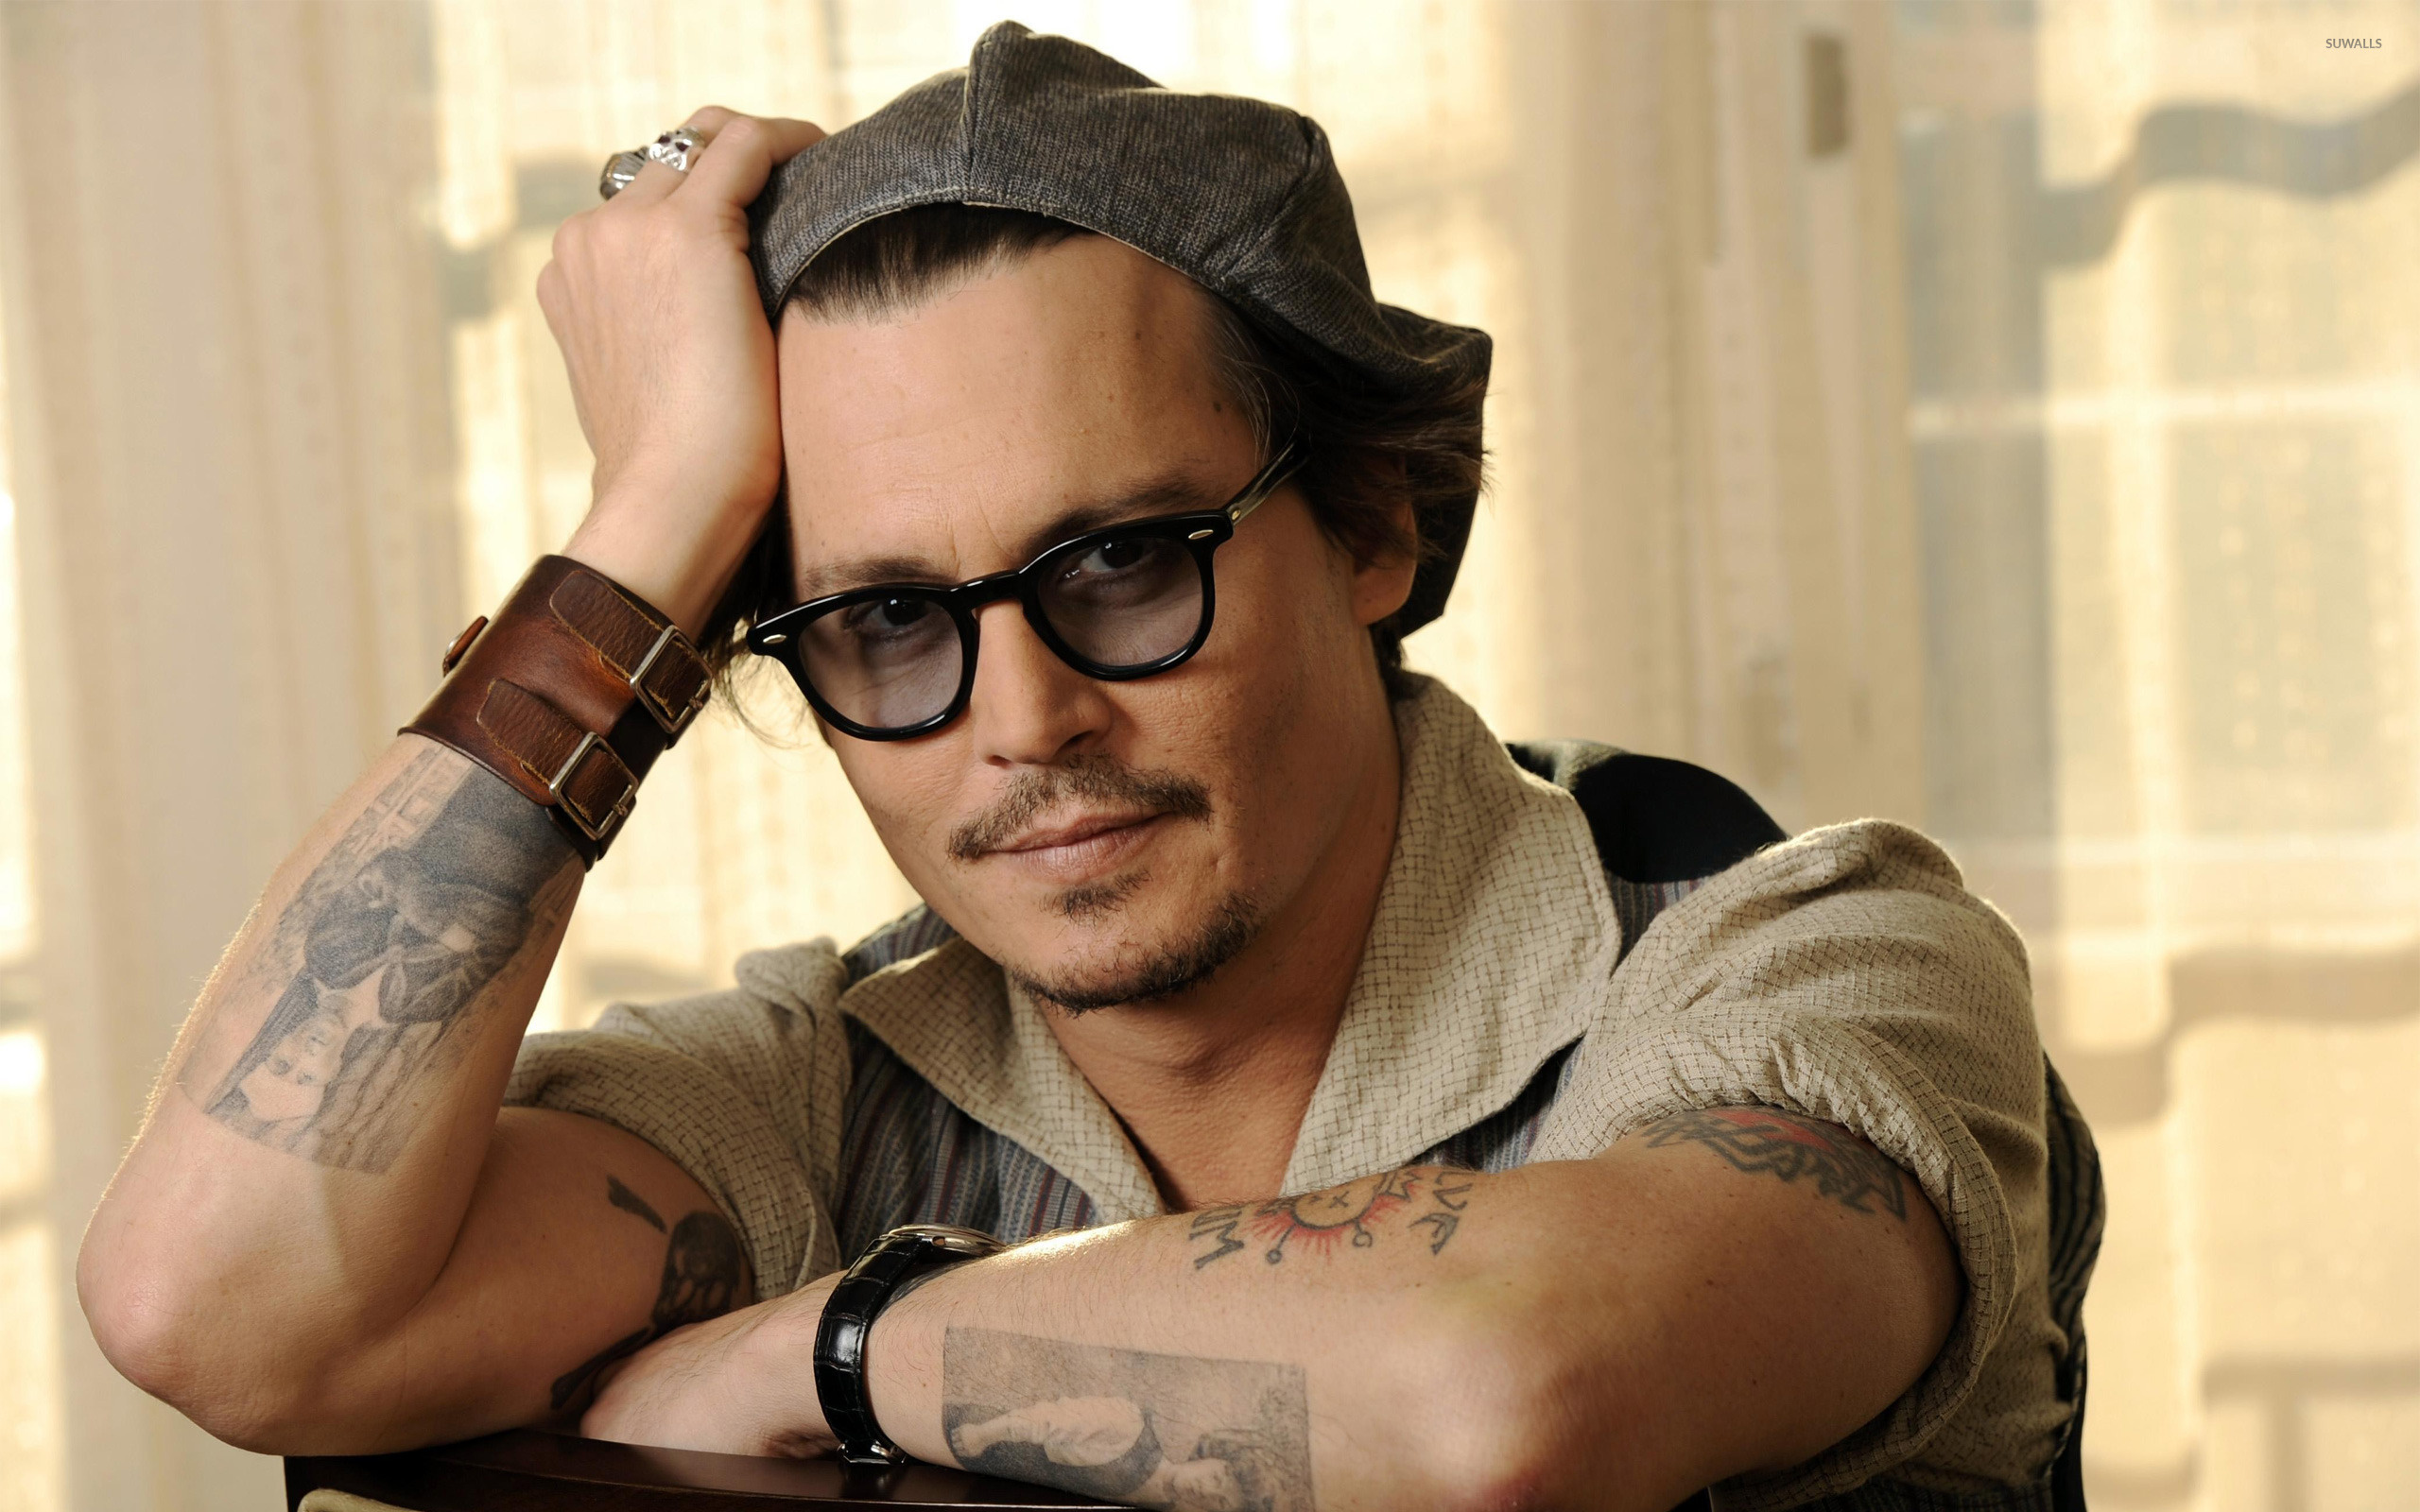 Johnny Depp: Celebrity, American actor and musician, known for his eclectic and unconventional film choices. 2560x1600 HD Wallpaper.